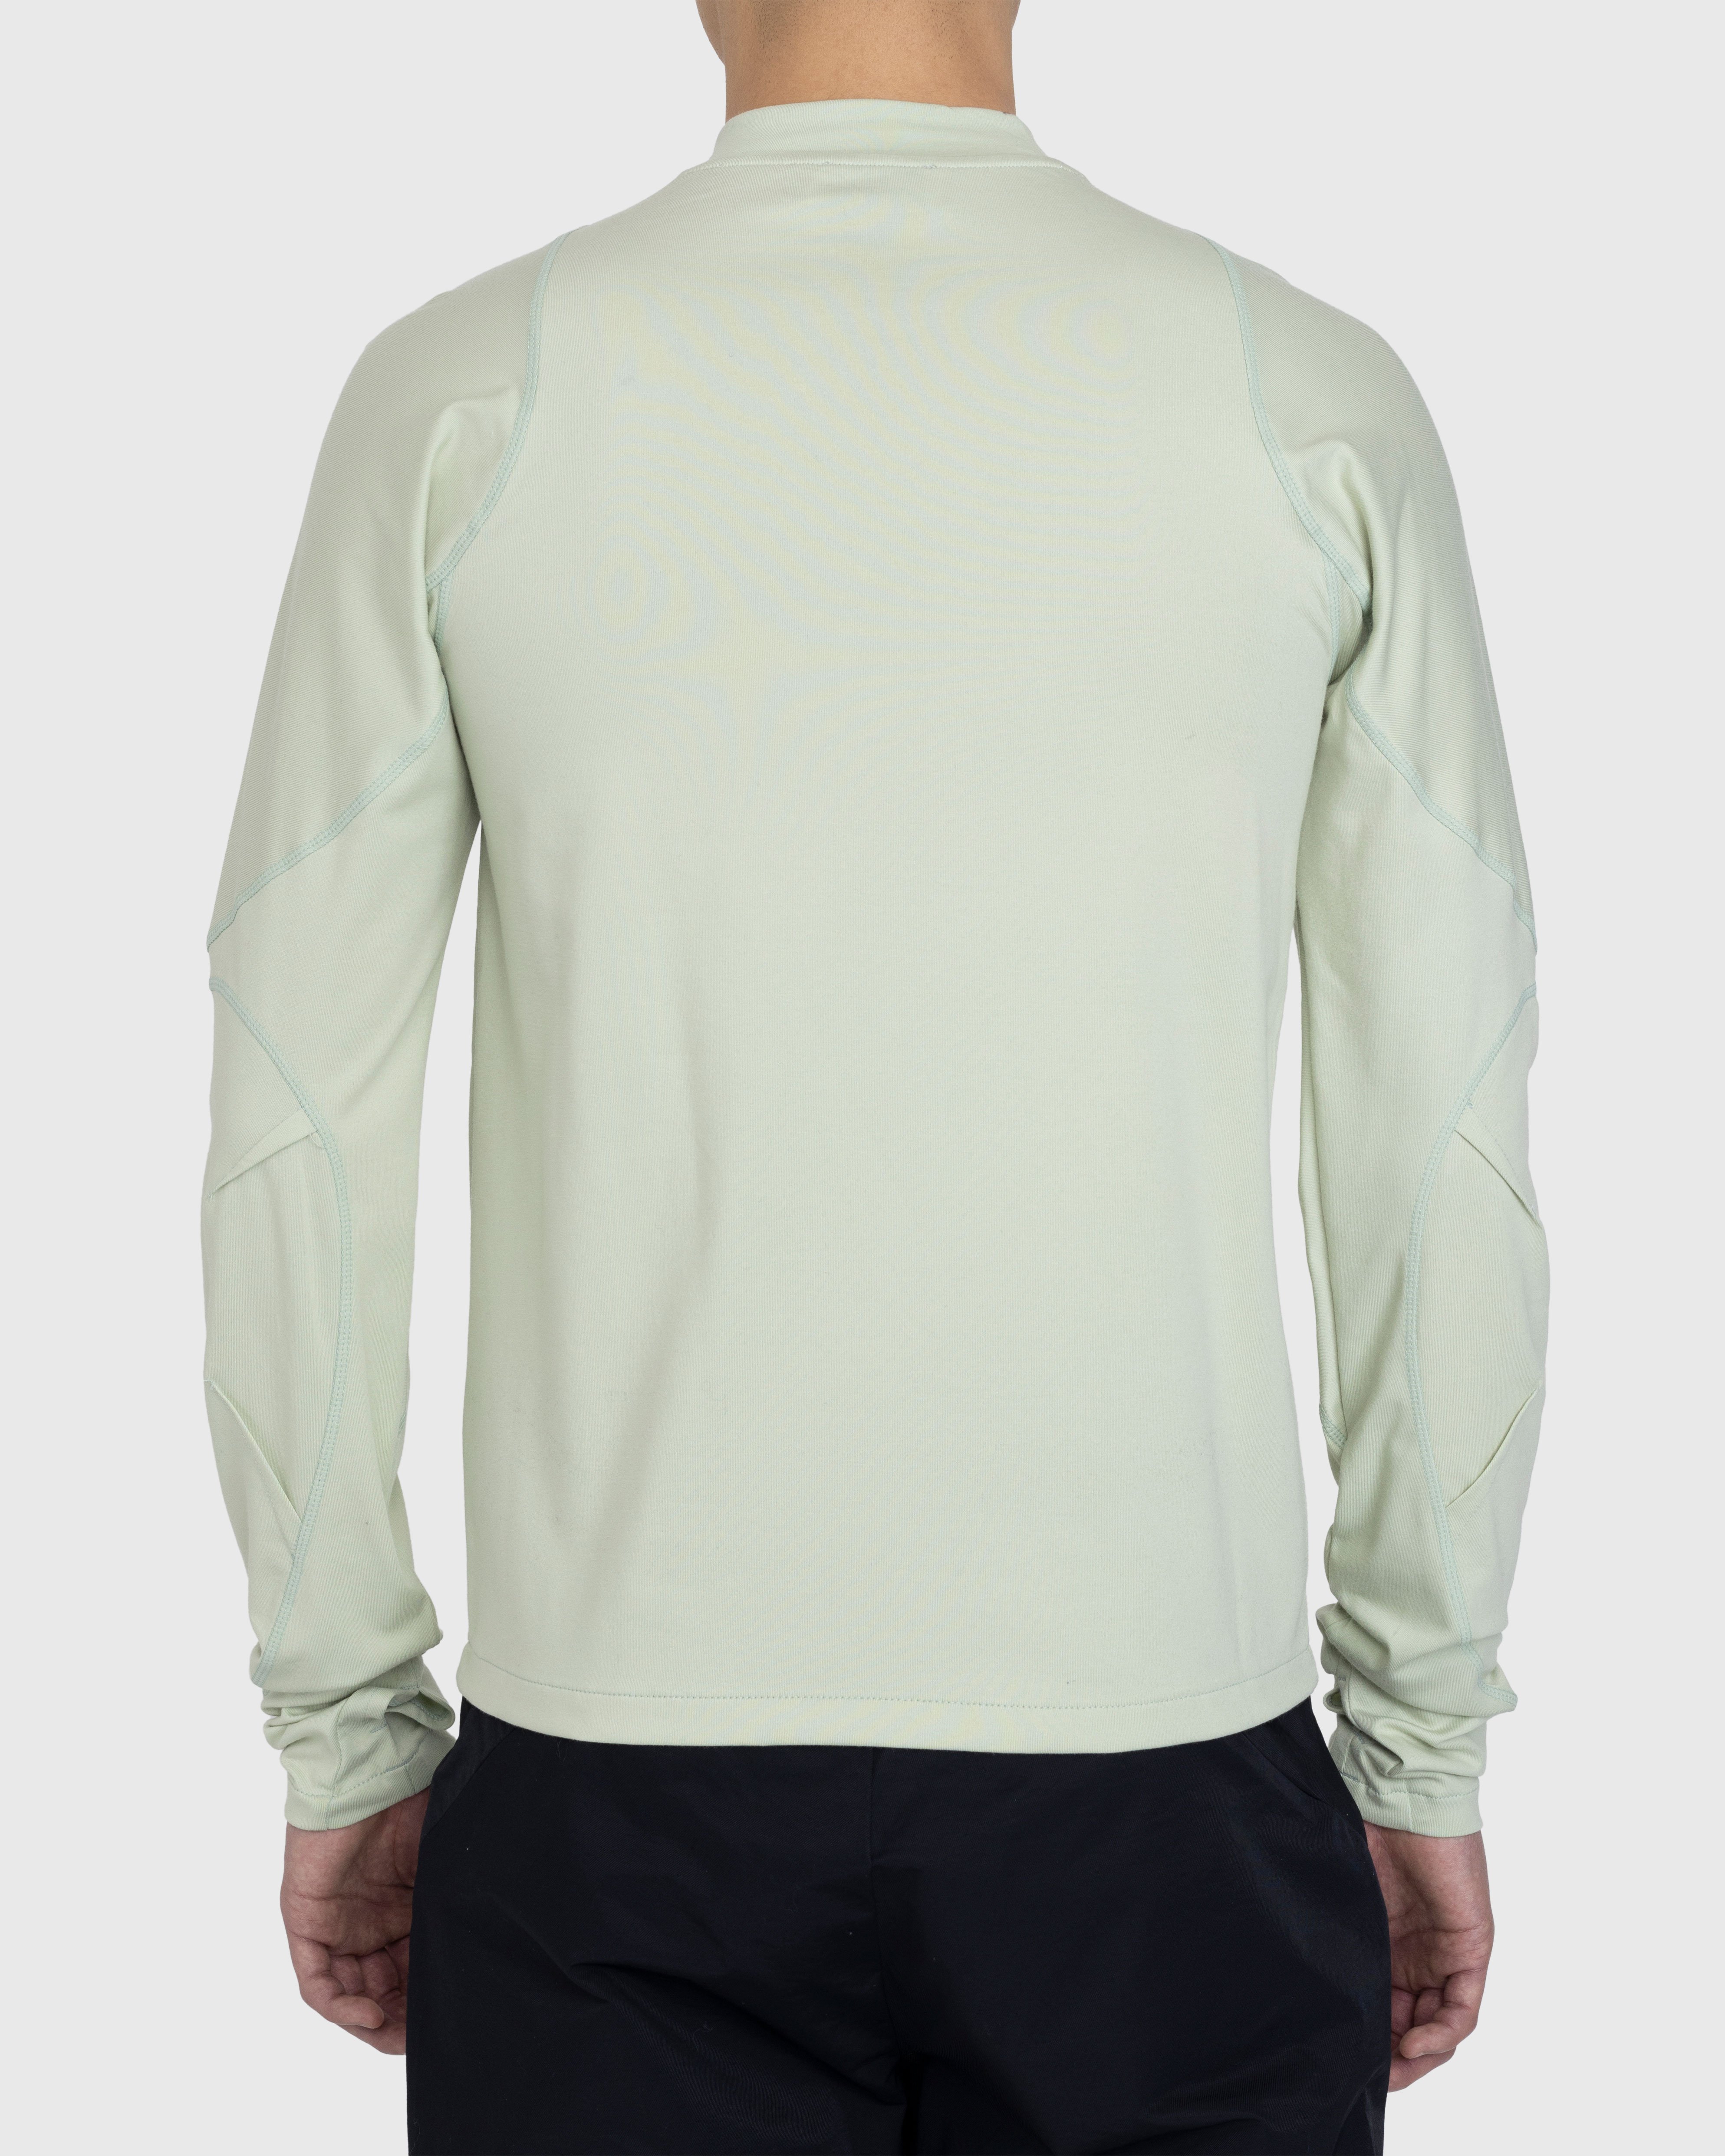 Post Archive Faction (PAF) - 5.0 Longsleeve Right Shirt Lime - Clothing - Green - Image 4